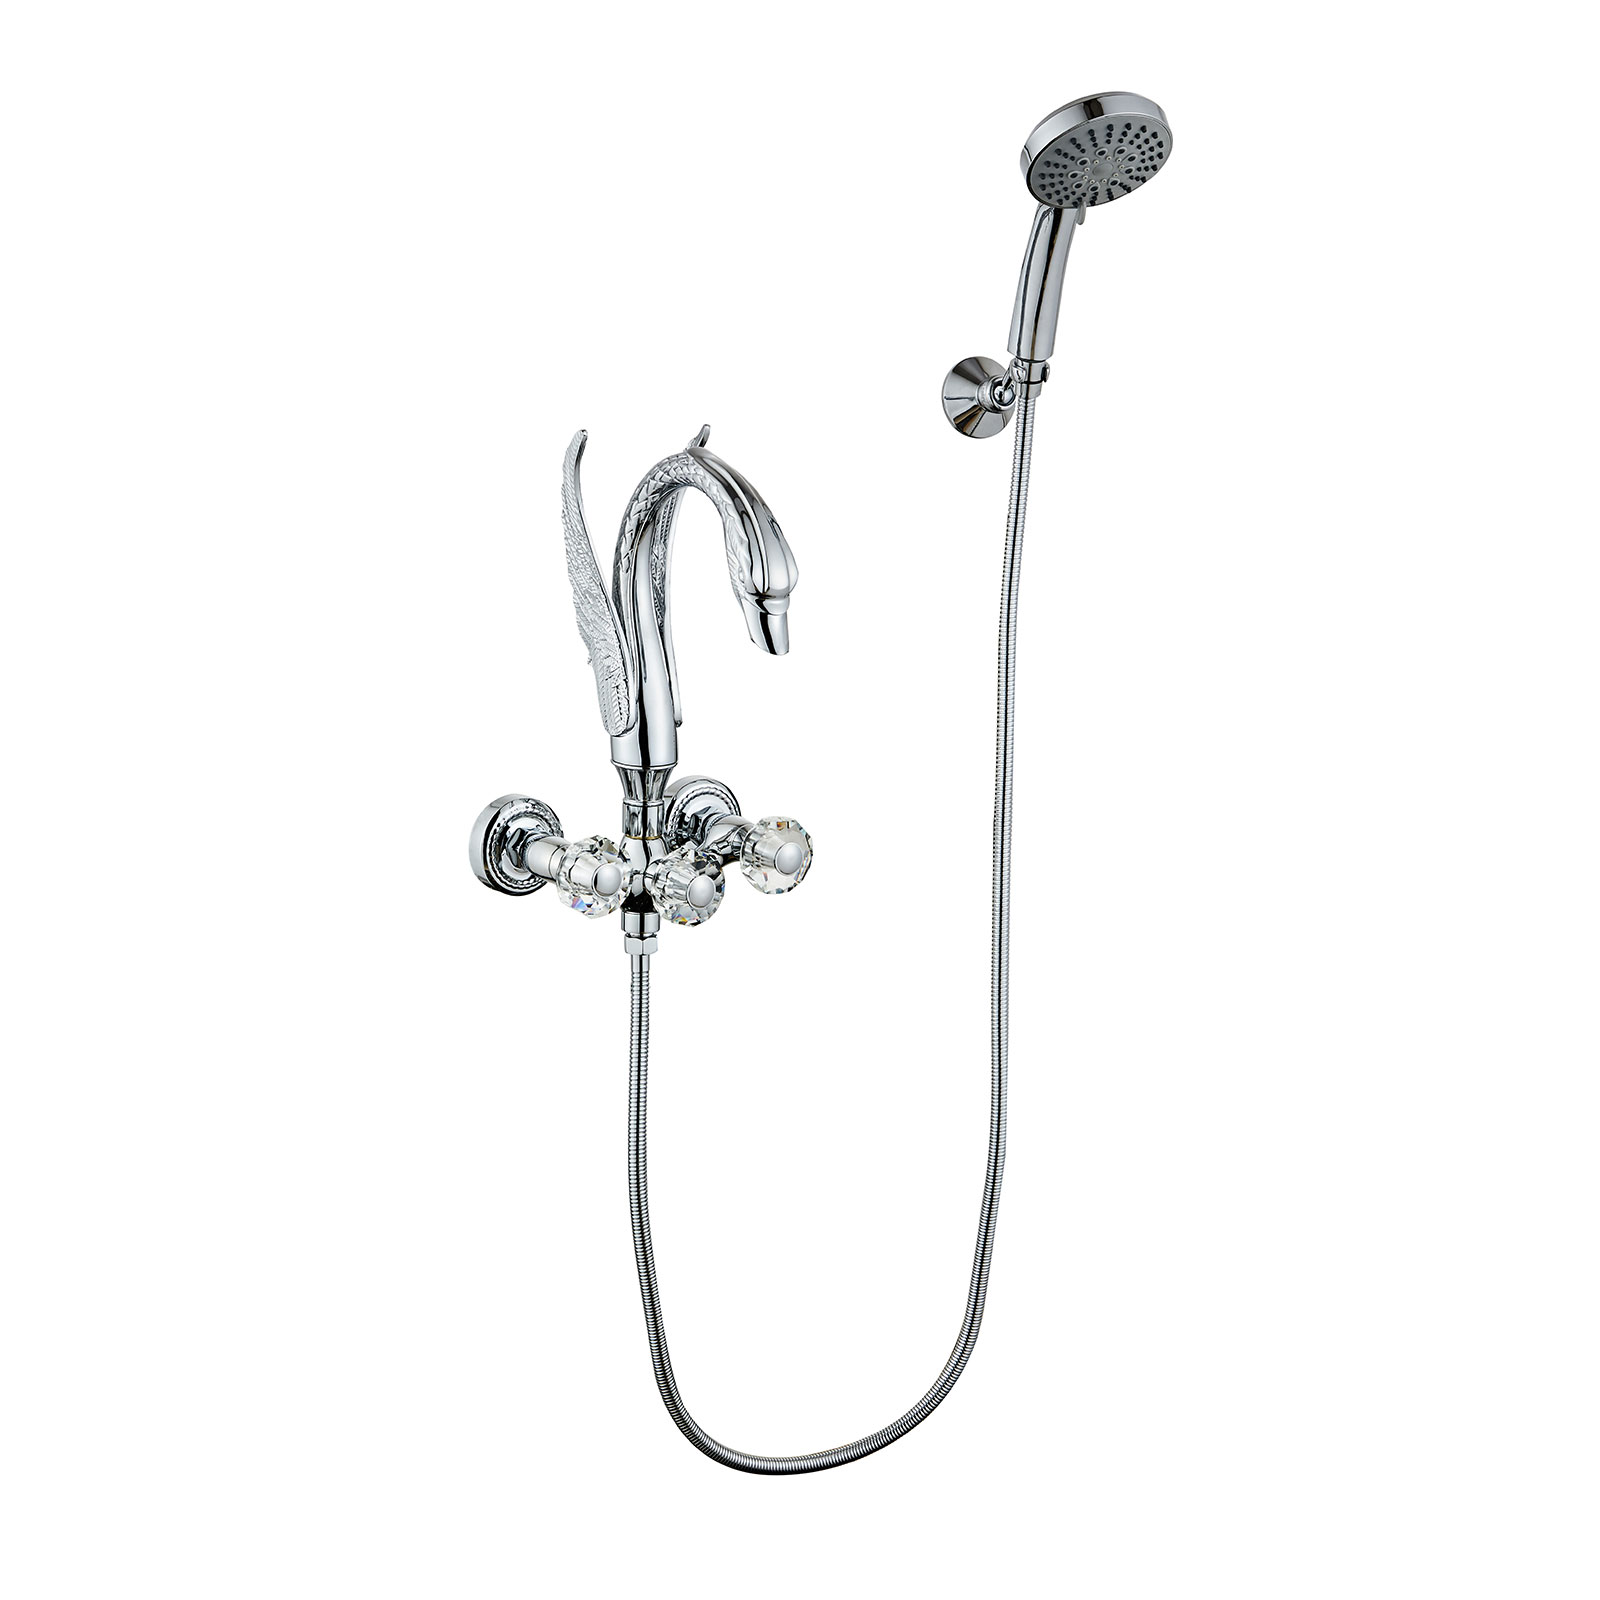 Wovier Swan Wall Mounted Tub Filler with Hand Shower W8811